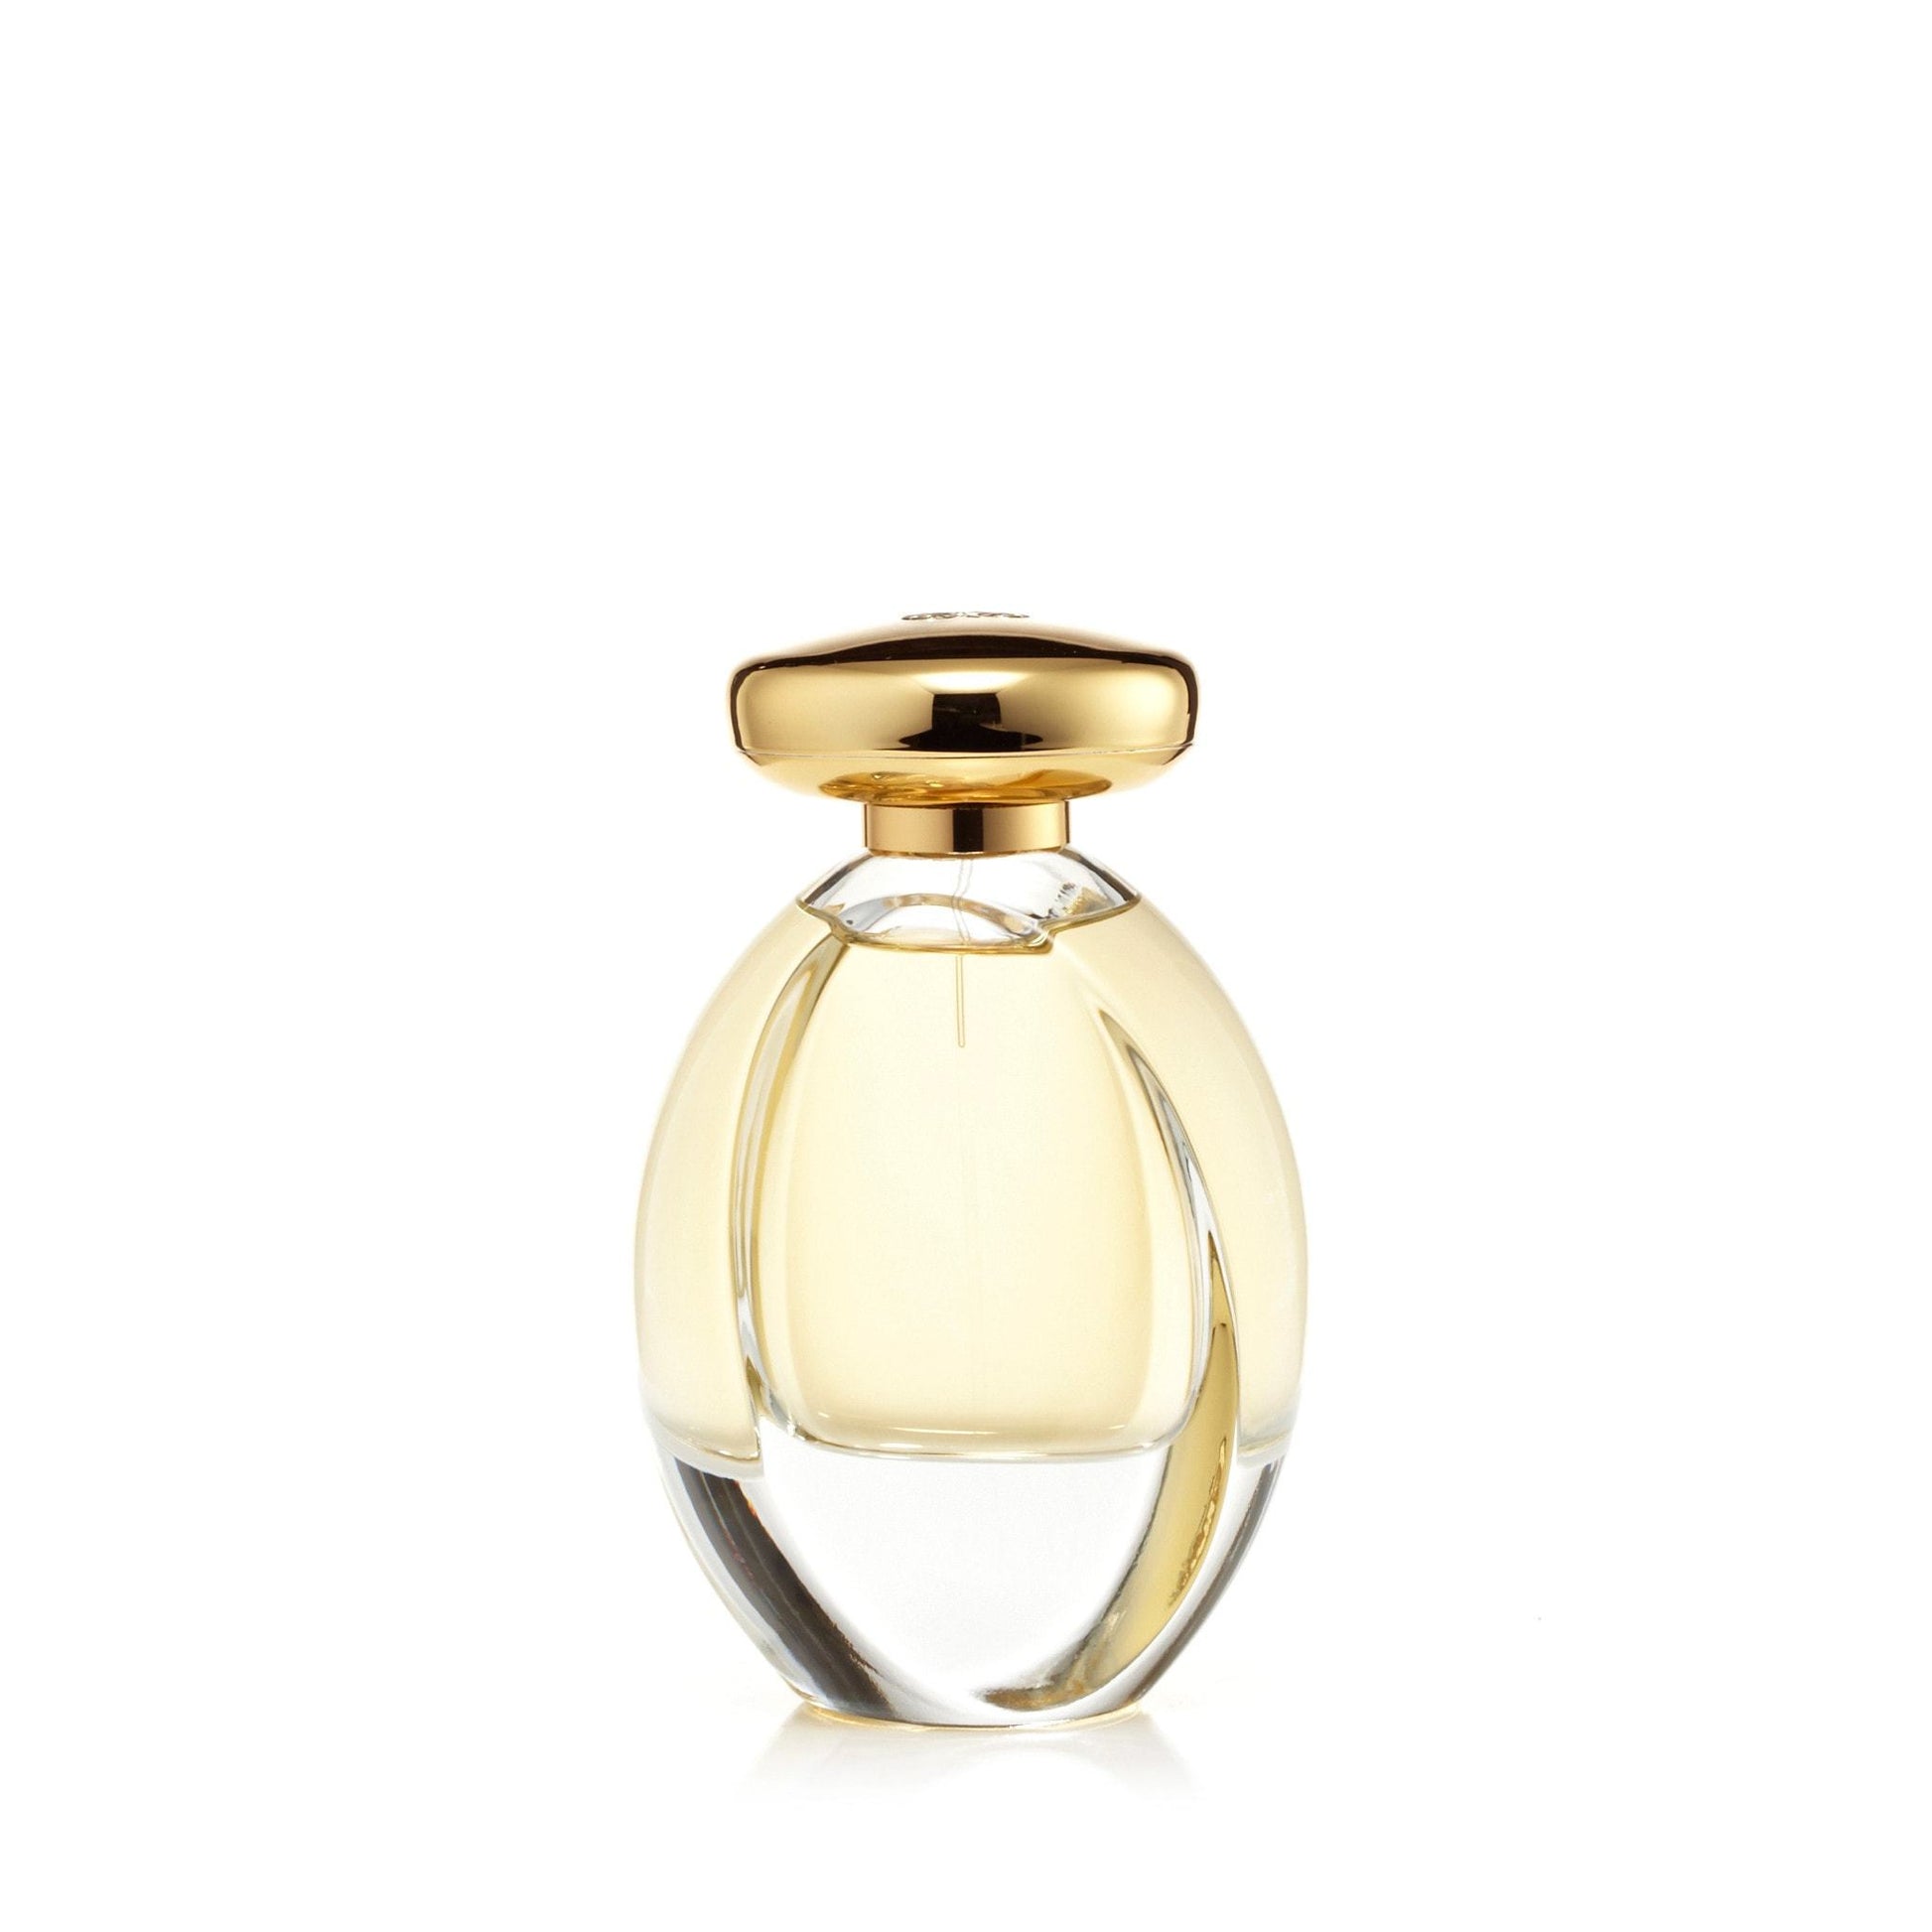 One Day In Monte Carlo Eau de Parfum Spray for Women, Product image 1